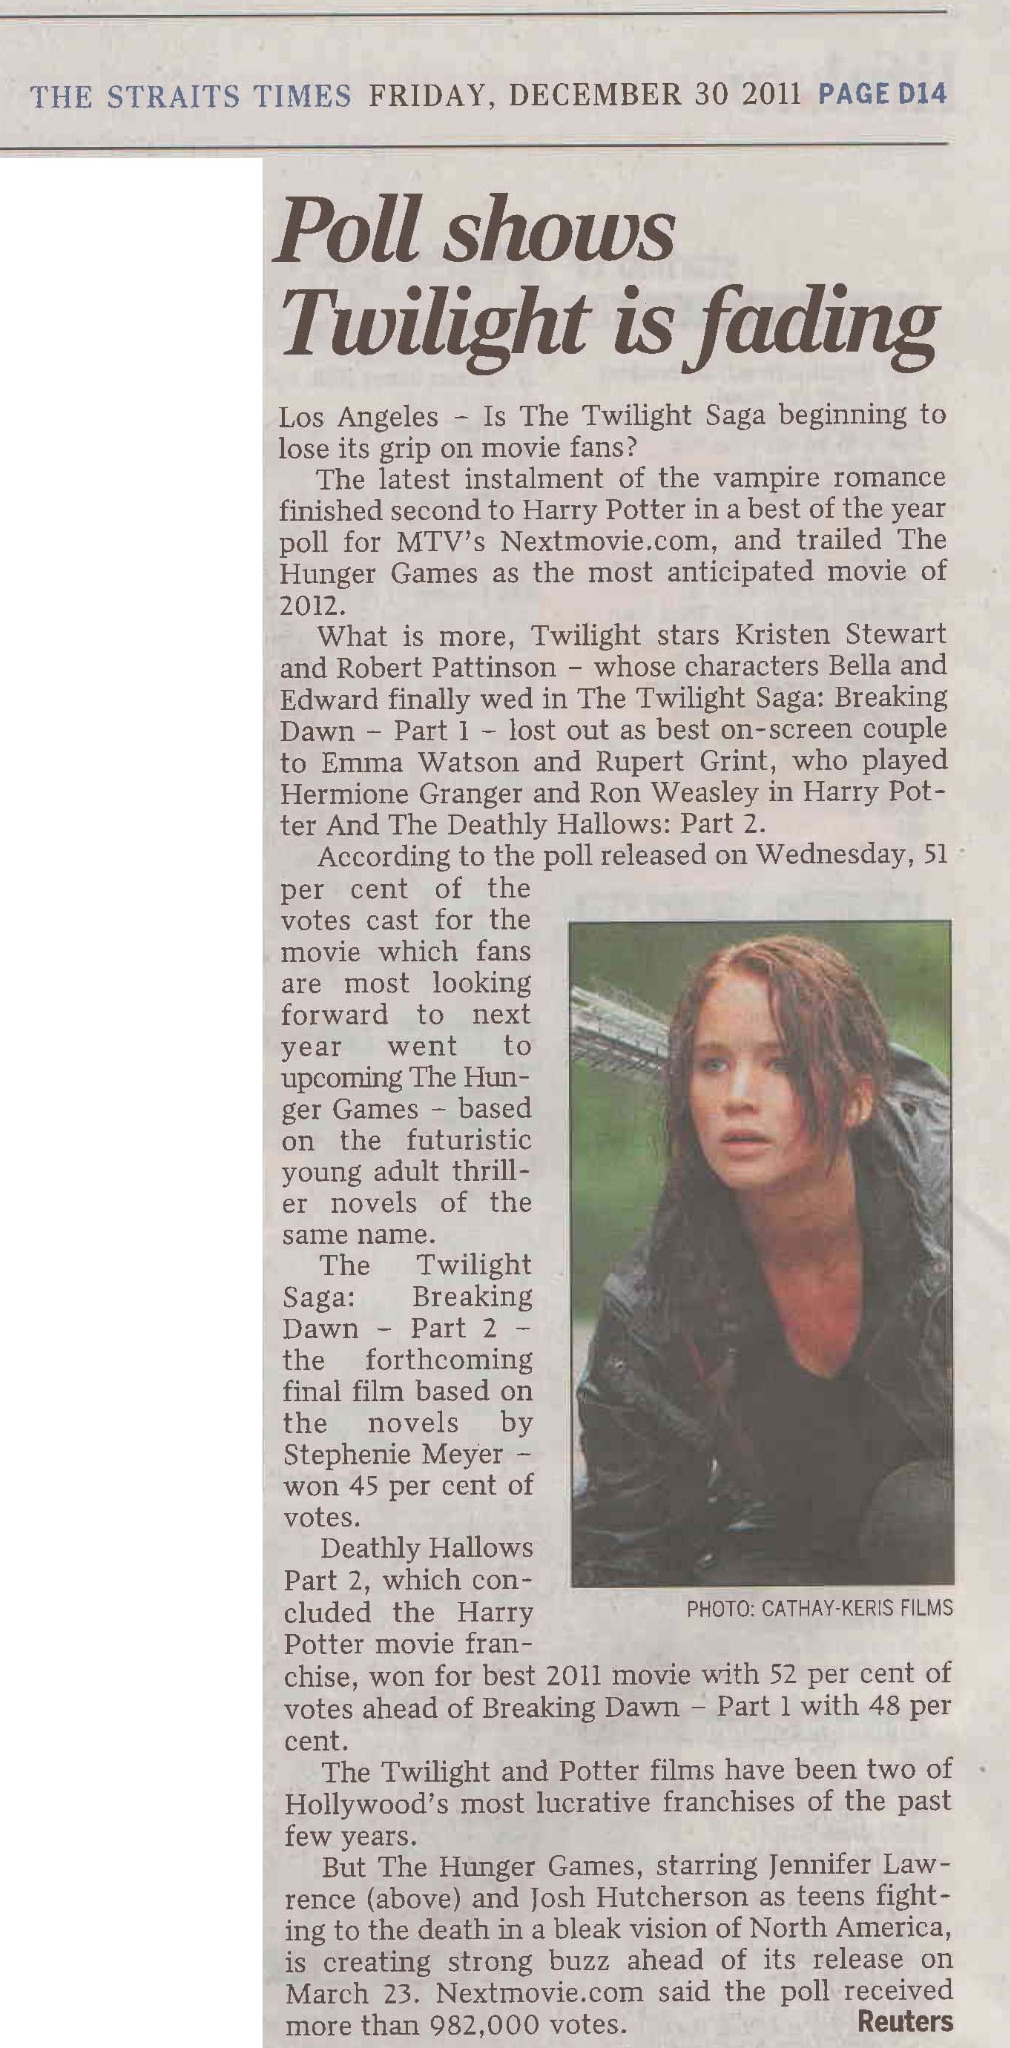 The Straits Times: ‘The Hunger Games’ Is Creating Strong Buzz ...